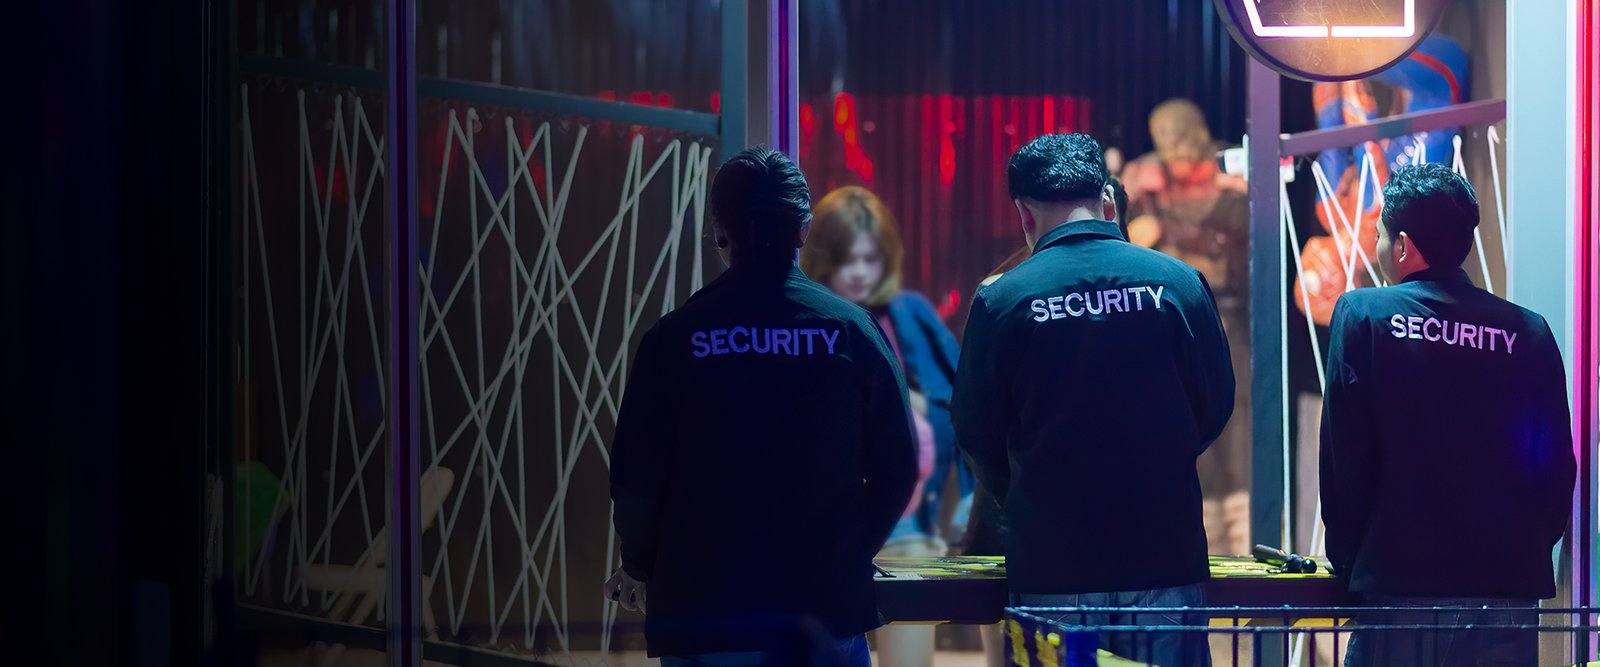 Events Safe And Secure